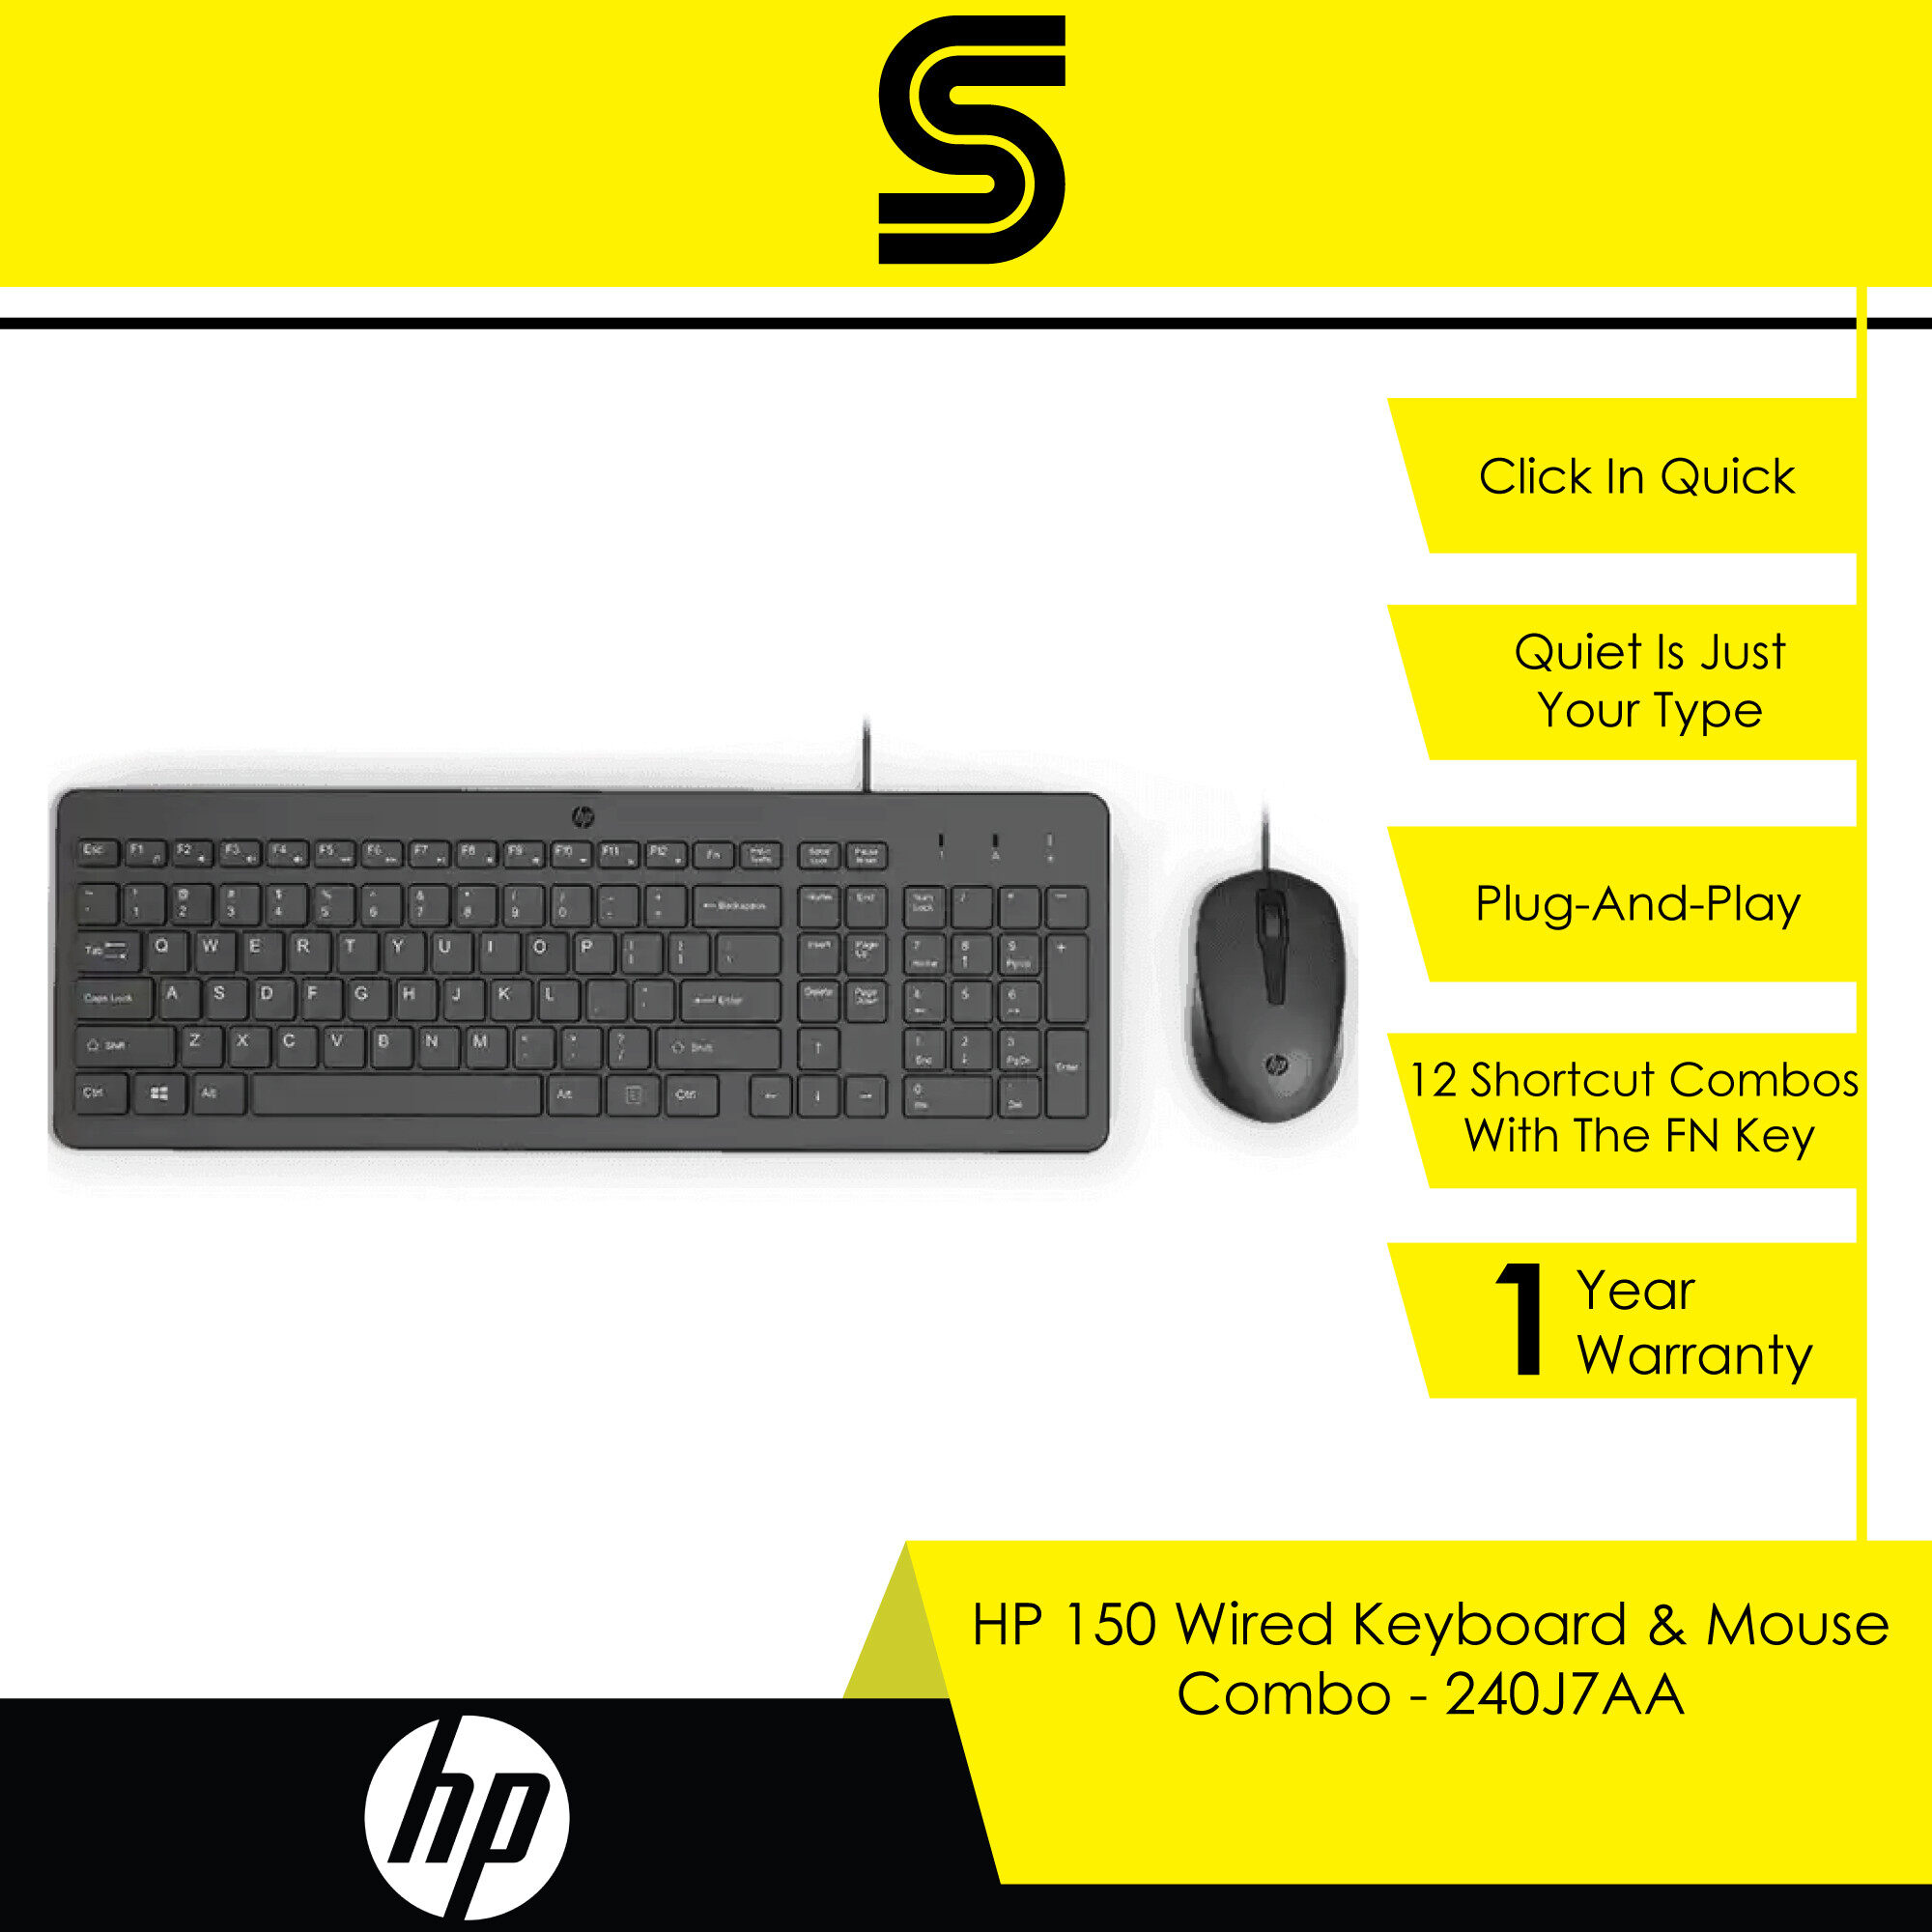 HP 150 Wired Keyboard & Mouse Combo - 240J7AA